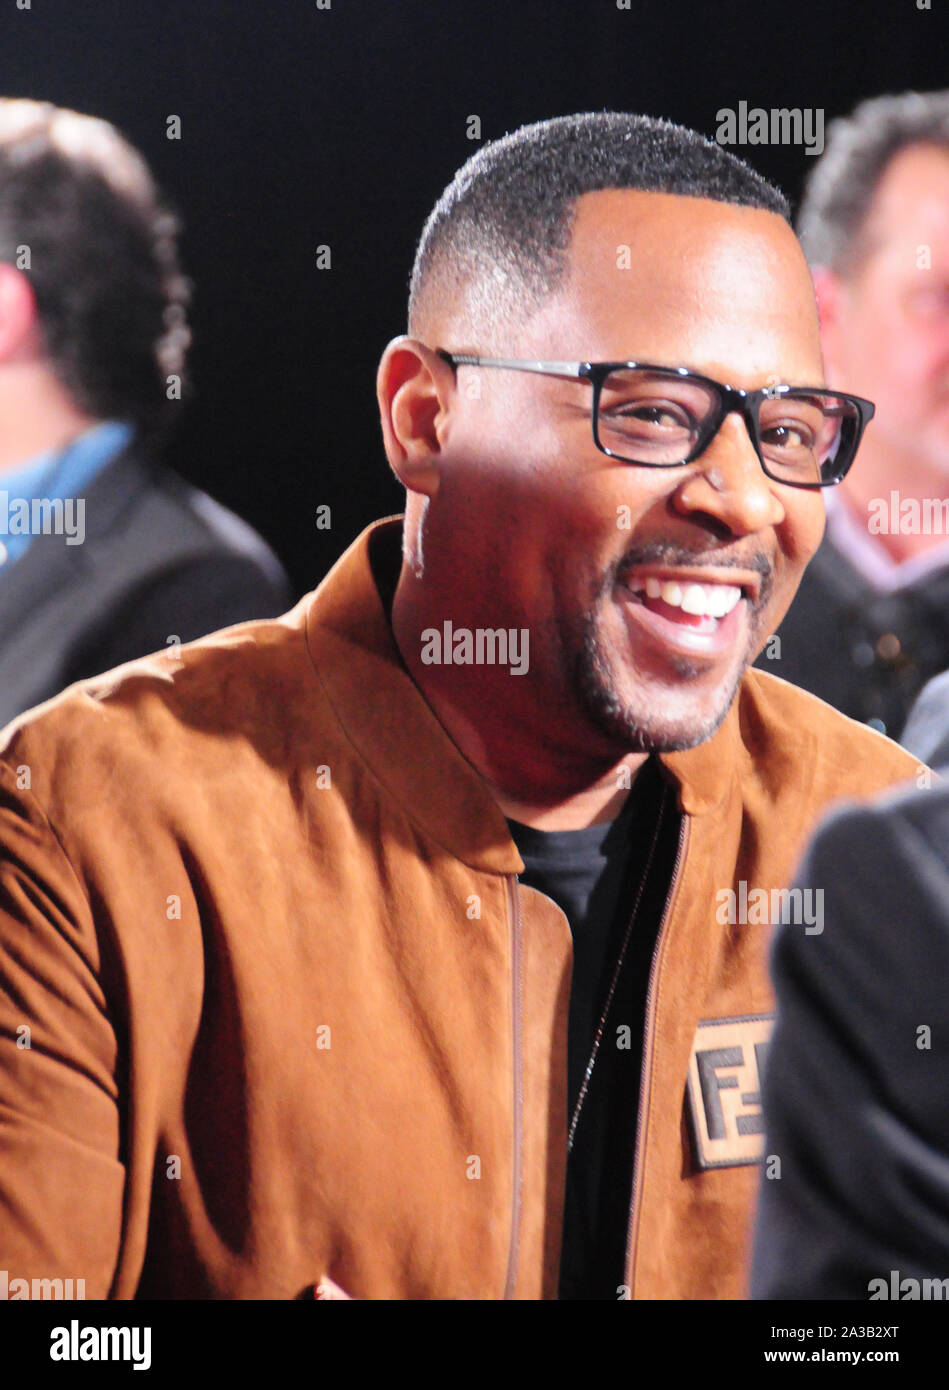 Hollywood, California, USA 6th October 2019 Actor Martin Lawrence attends Paramount Pictures Presents The Premiere of 'Gemini Man' on October 6, 2019 at TCL Chinese Theatre in Hollywood, California, USA. Photo by Barry King/Alamy Live News Stock Photo